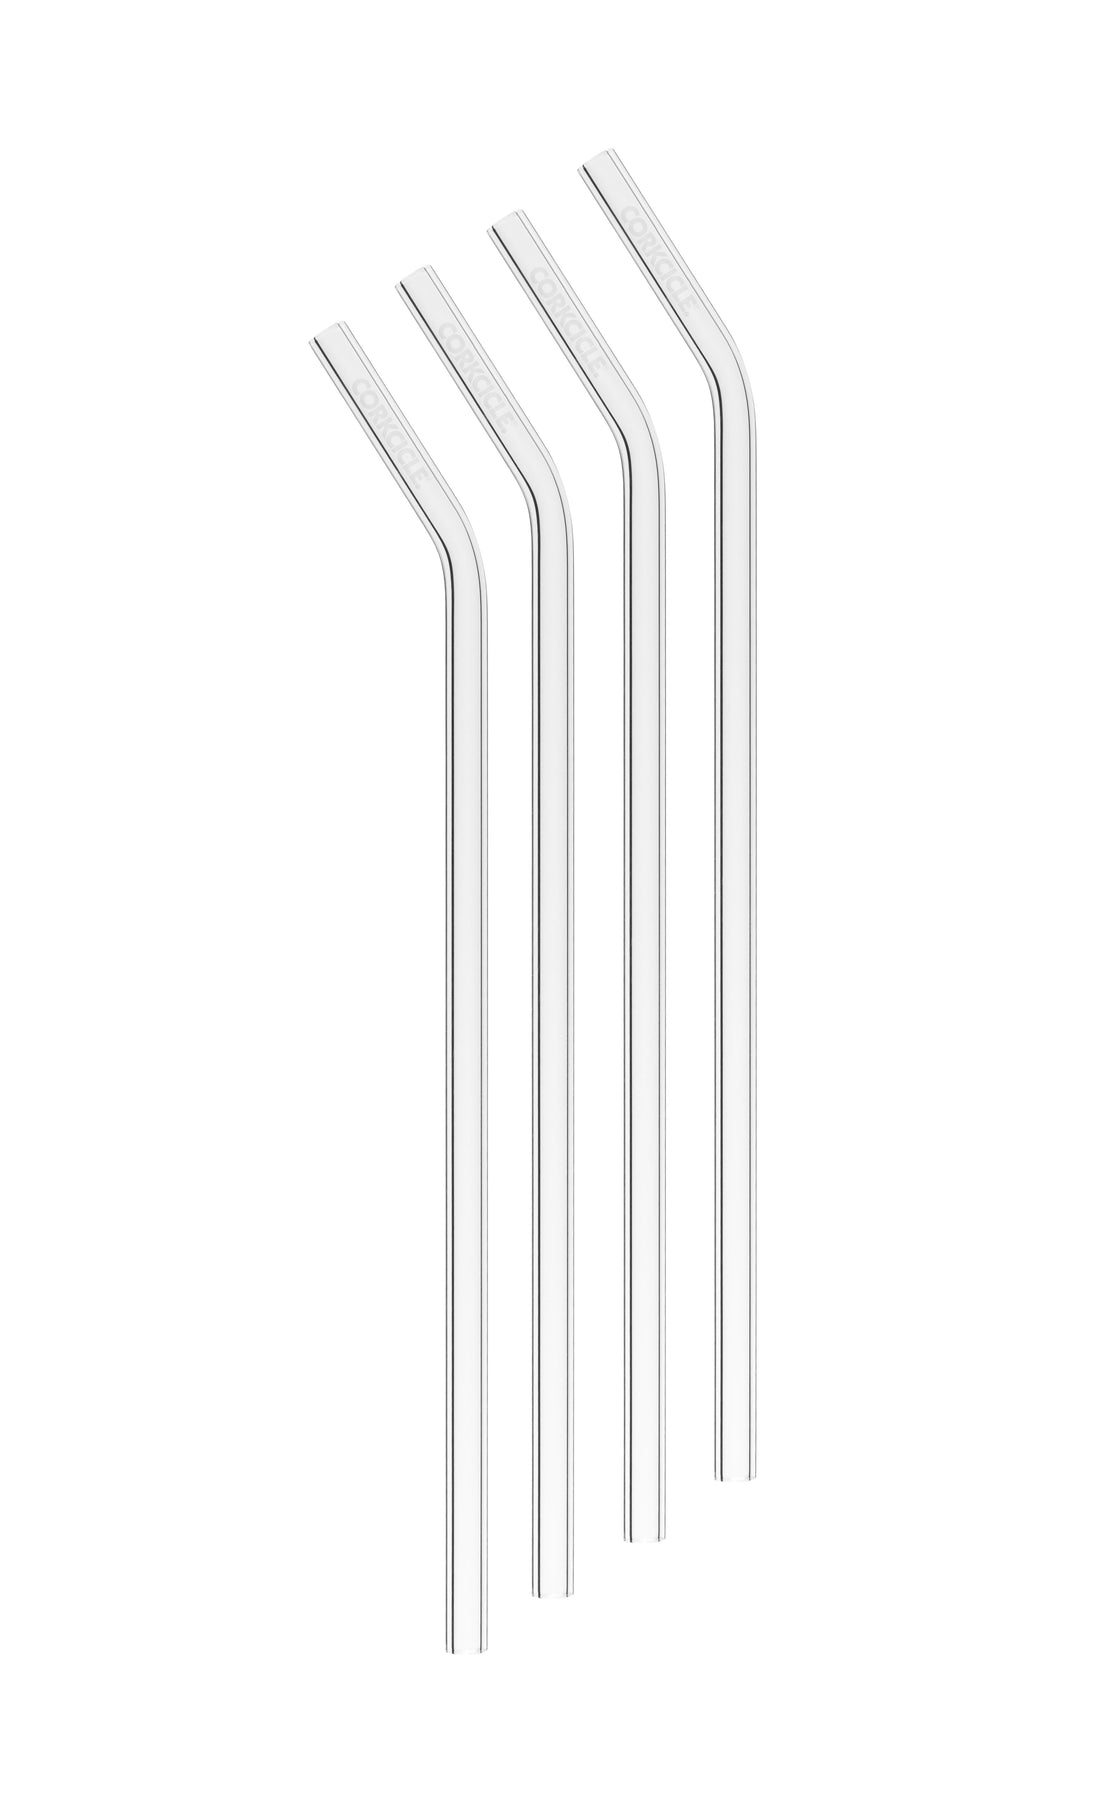 Corkcicle Glass Straw Set Clear